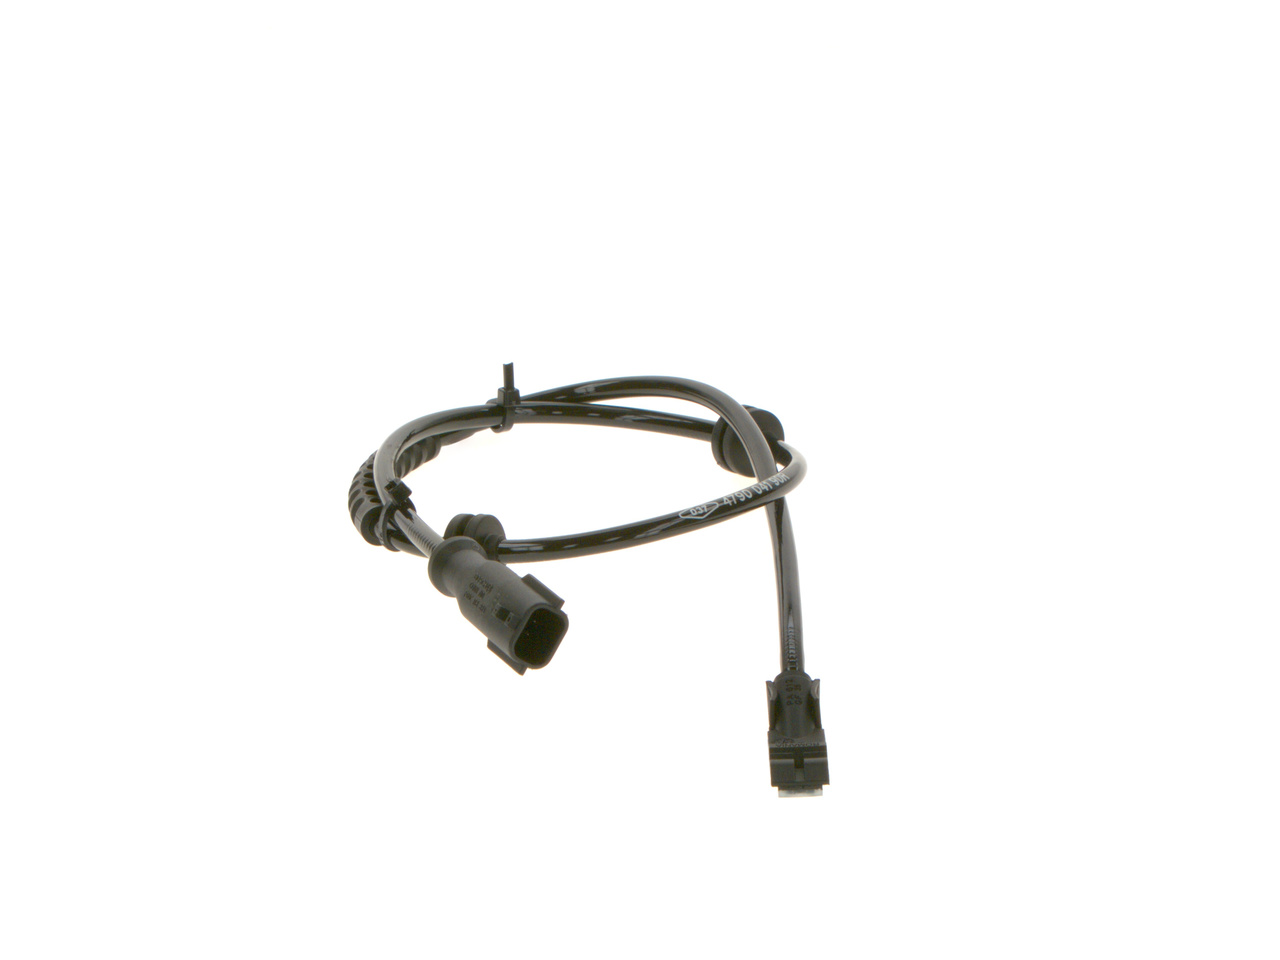 BOSCH 0 265 008 923 ABS sensor with cable, Hall Sensor, 654mm